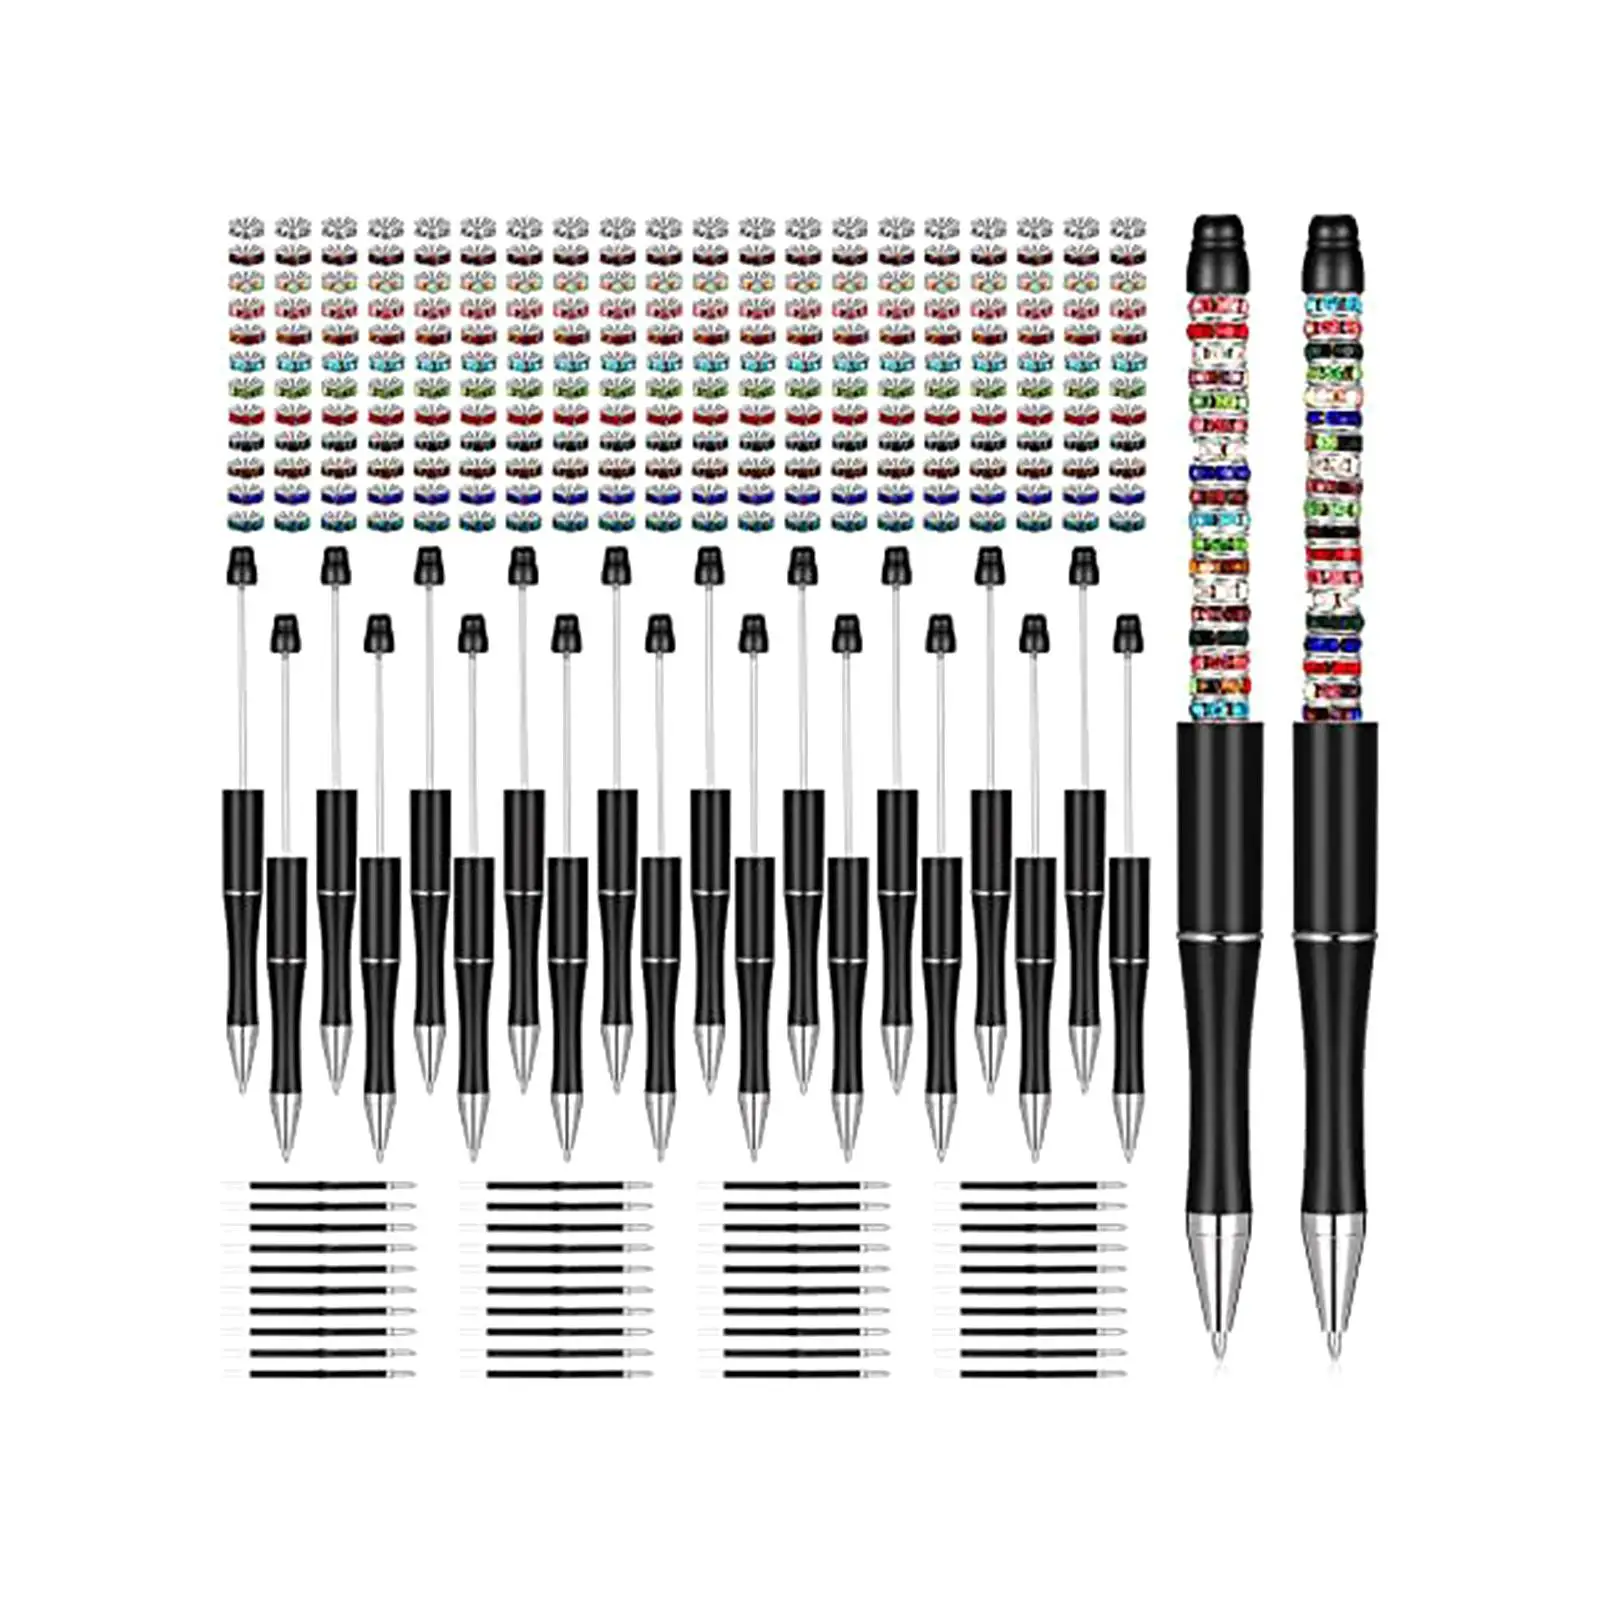 1.0mm Assorted Bead Pen Set Christmas Decor 300 Pack Beadable Pens for Draw Stationery Supplies Exam Spare Students Presents